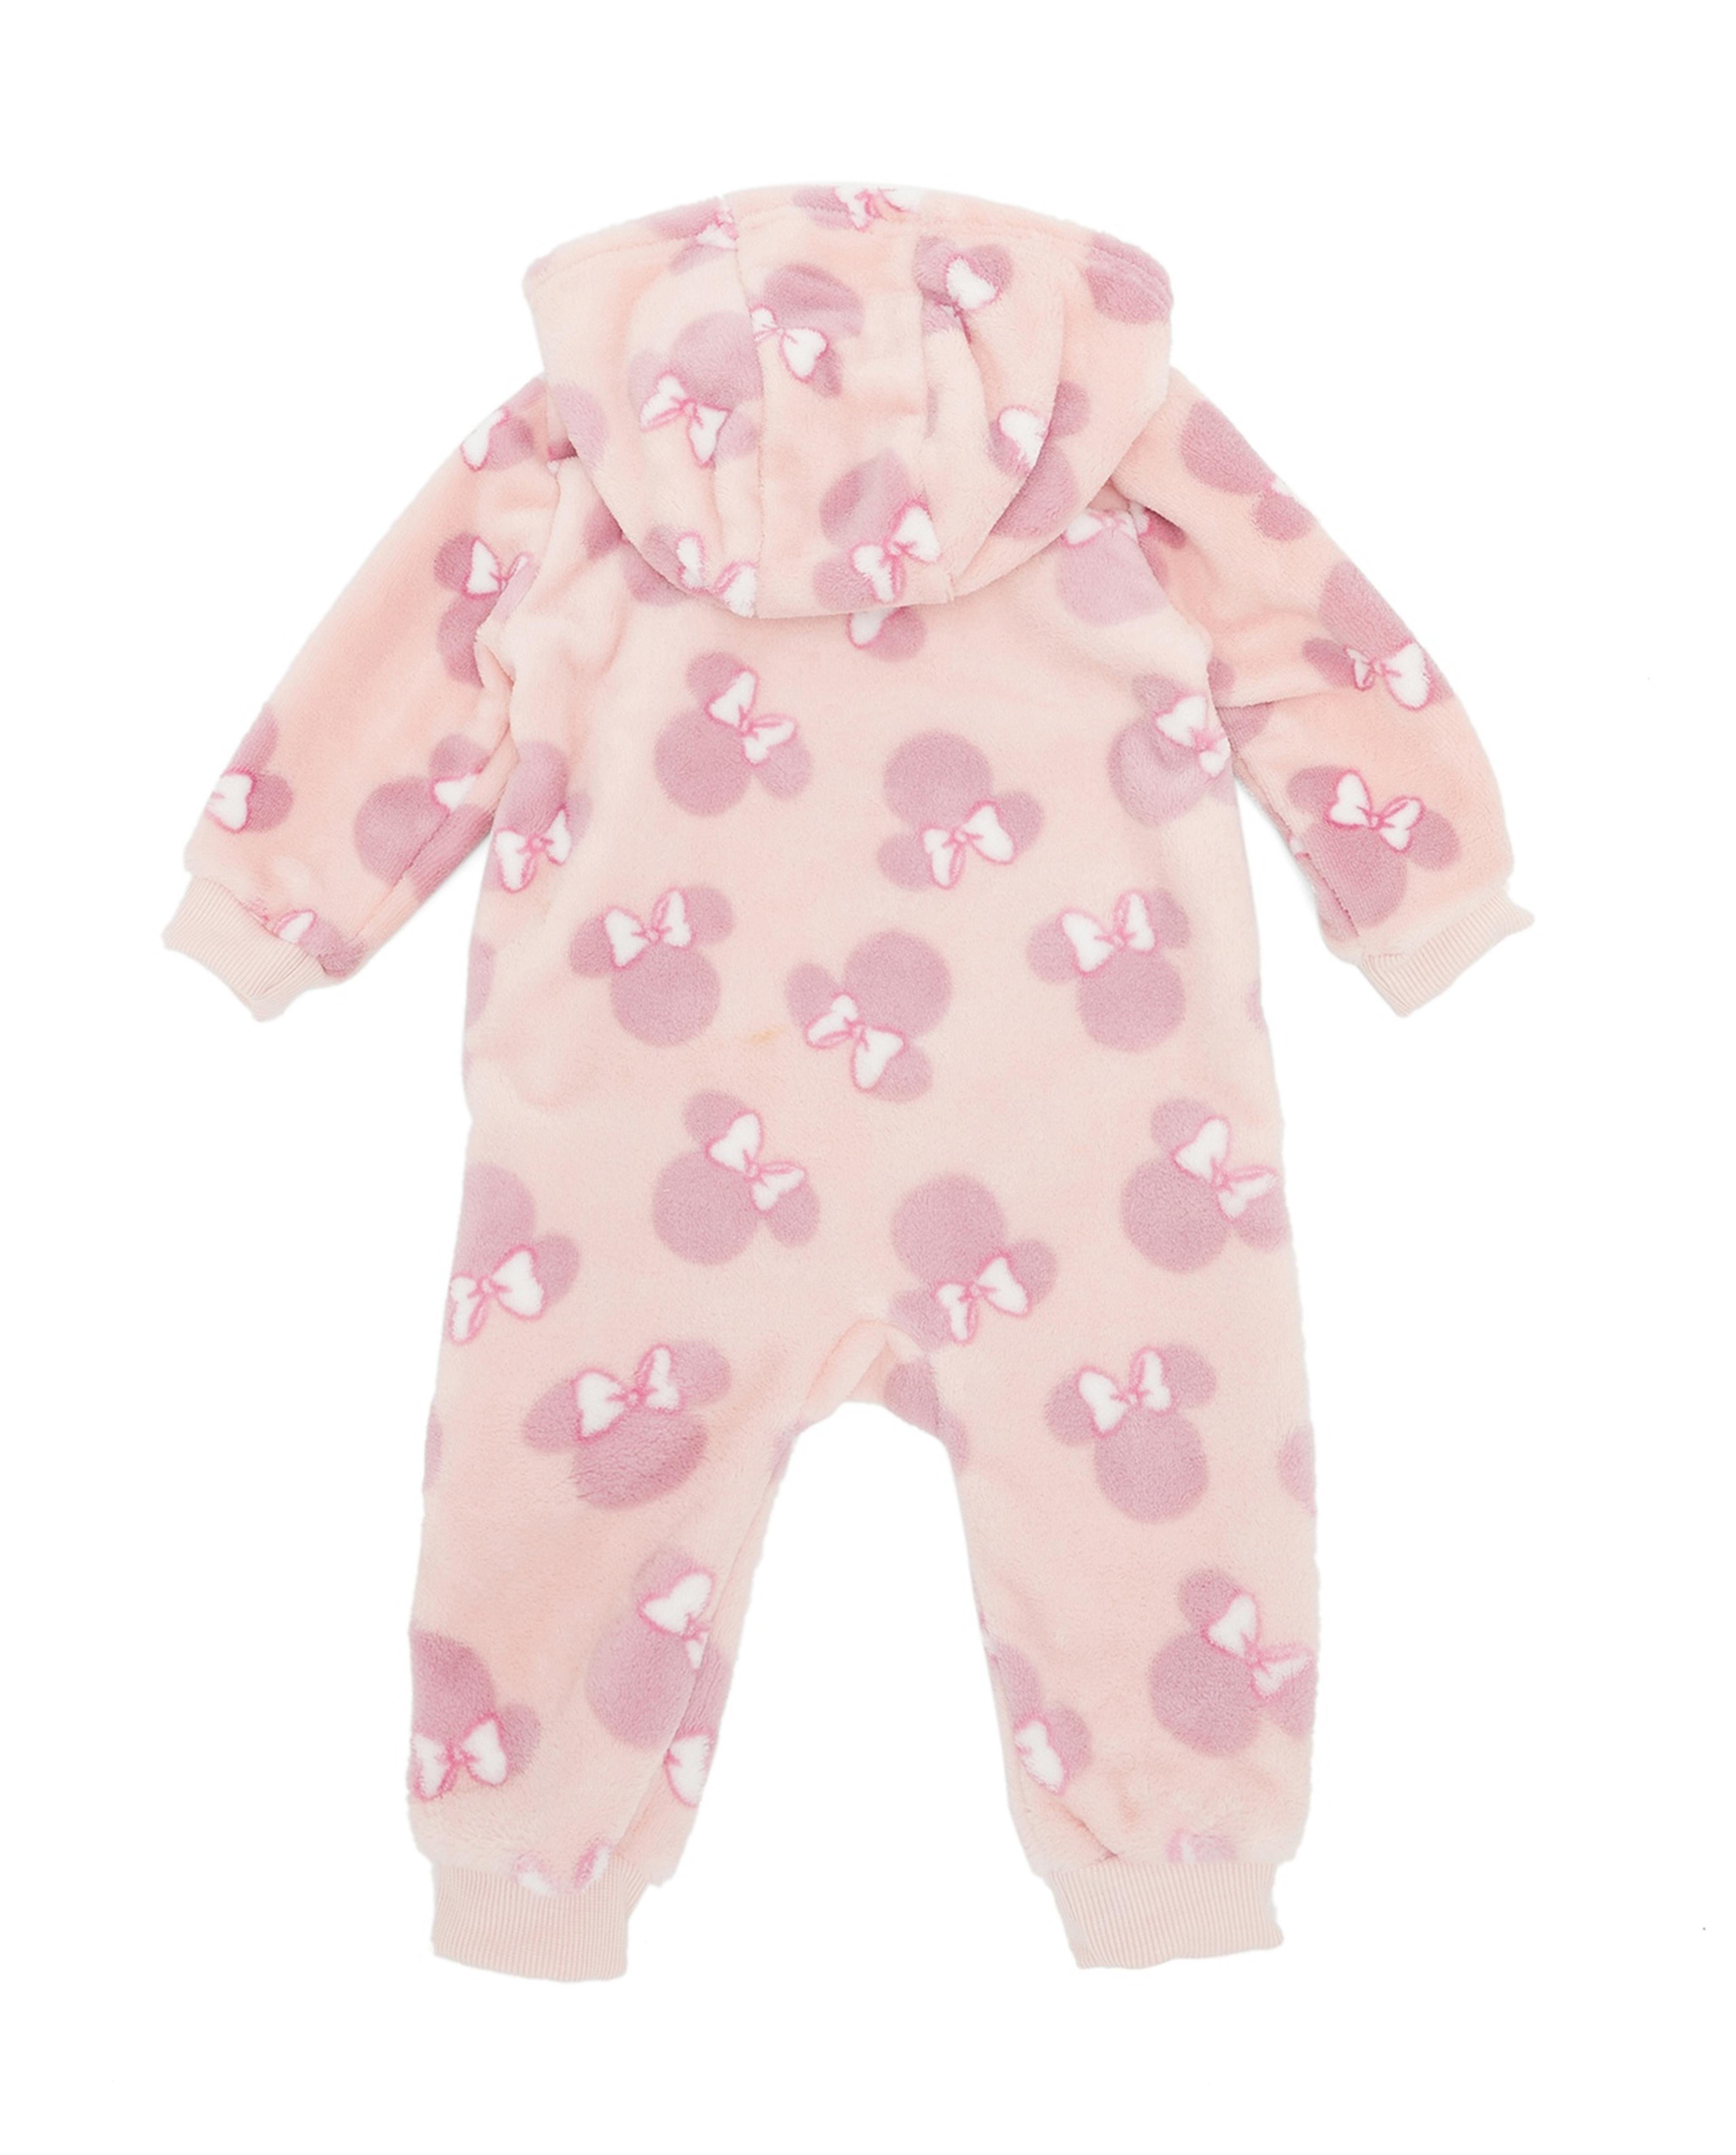 Minnie Mouse Applique Hooded Sleepsuit